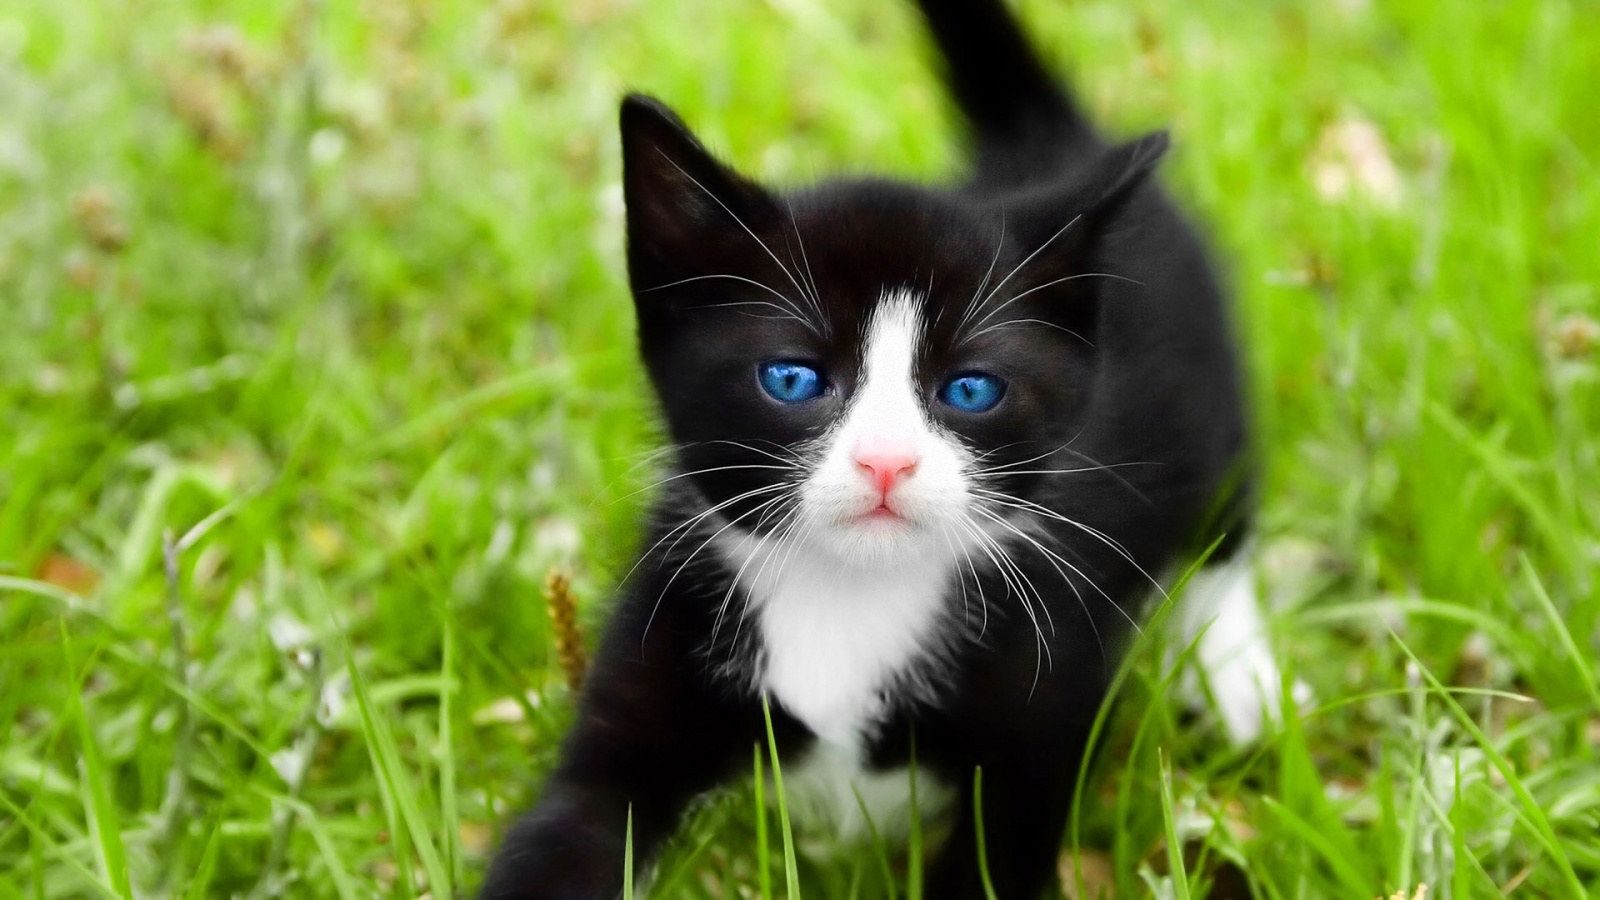 Black Kitten Playing in the Grass